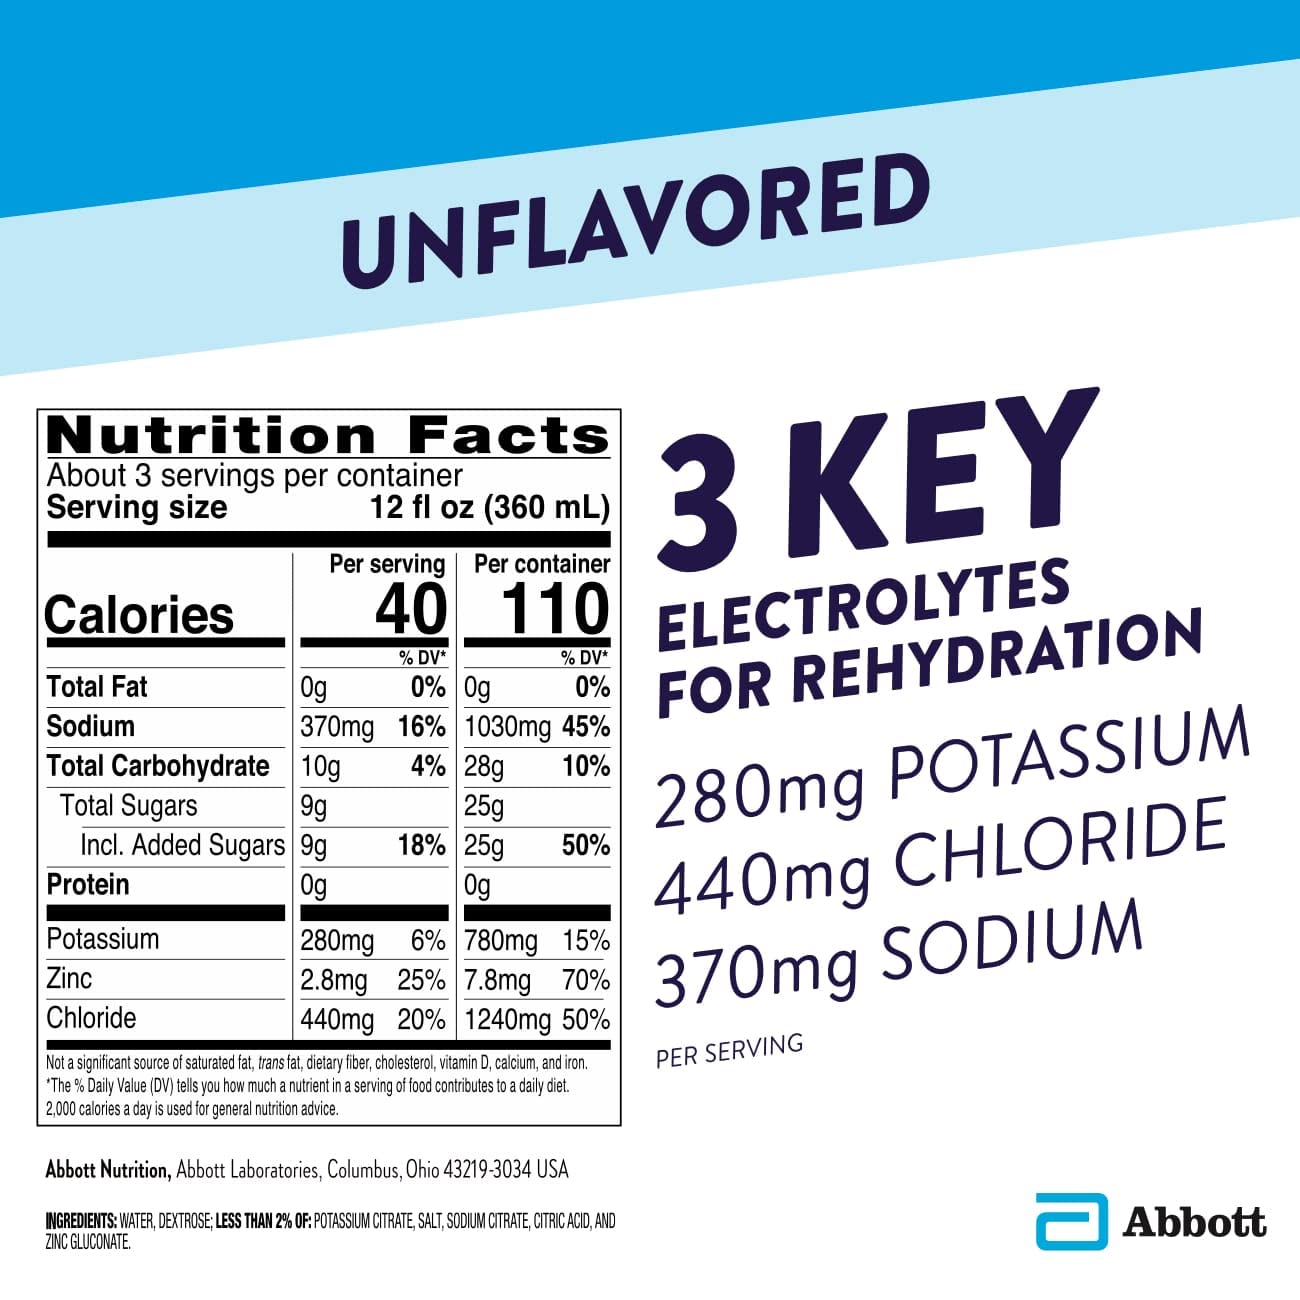 Pedialyte Electrolyte Solution, Unflavored, Hydration Drink 33.81 Fl oz(Pack of 8)